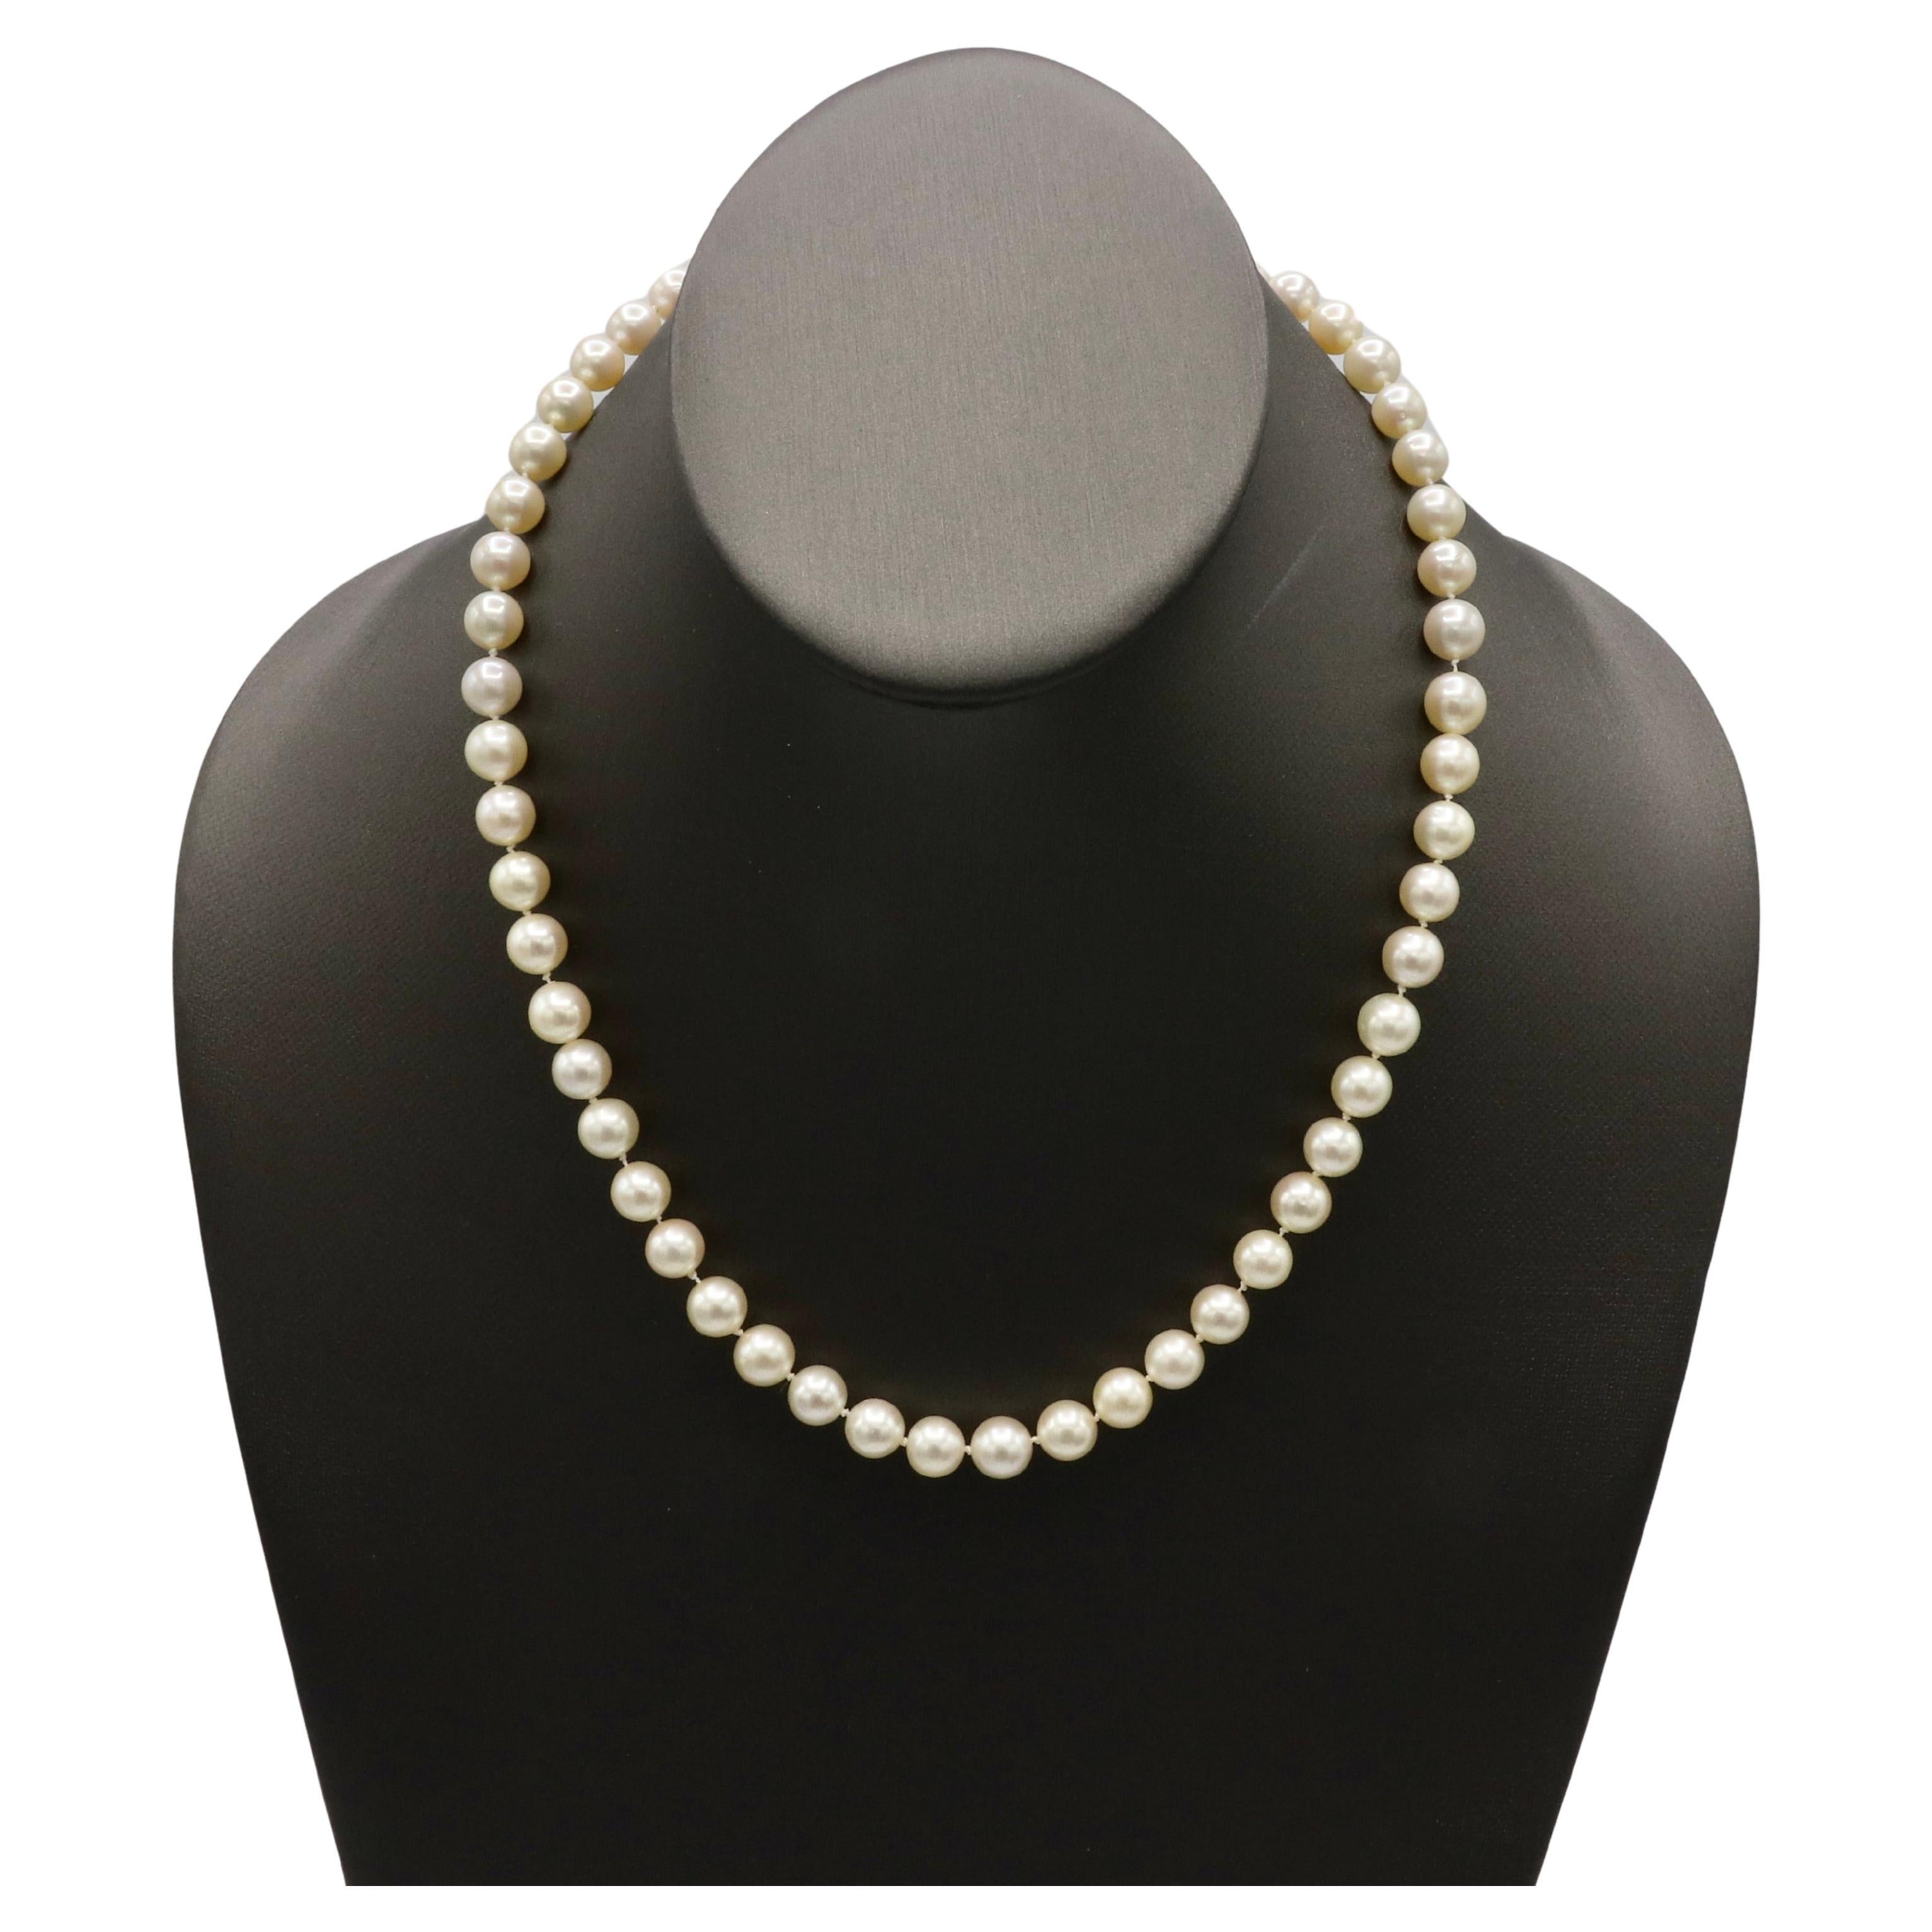 Cultured Pearl Necklace With 14 Karat Yellow Gold Clasp 
Metal: 14k yellow gold
Weight: 34.5 grams
Pearls: Cultured, 7.5-8mm creamy white color with high luster
Length: 17 inches
